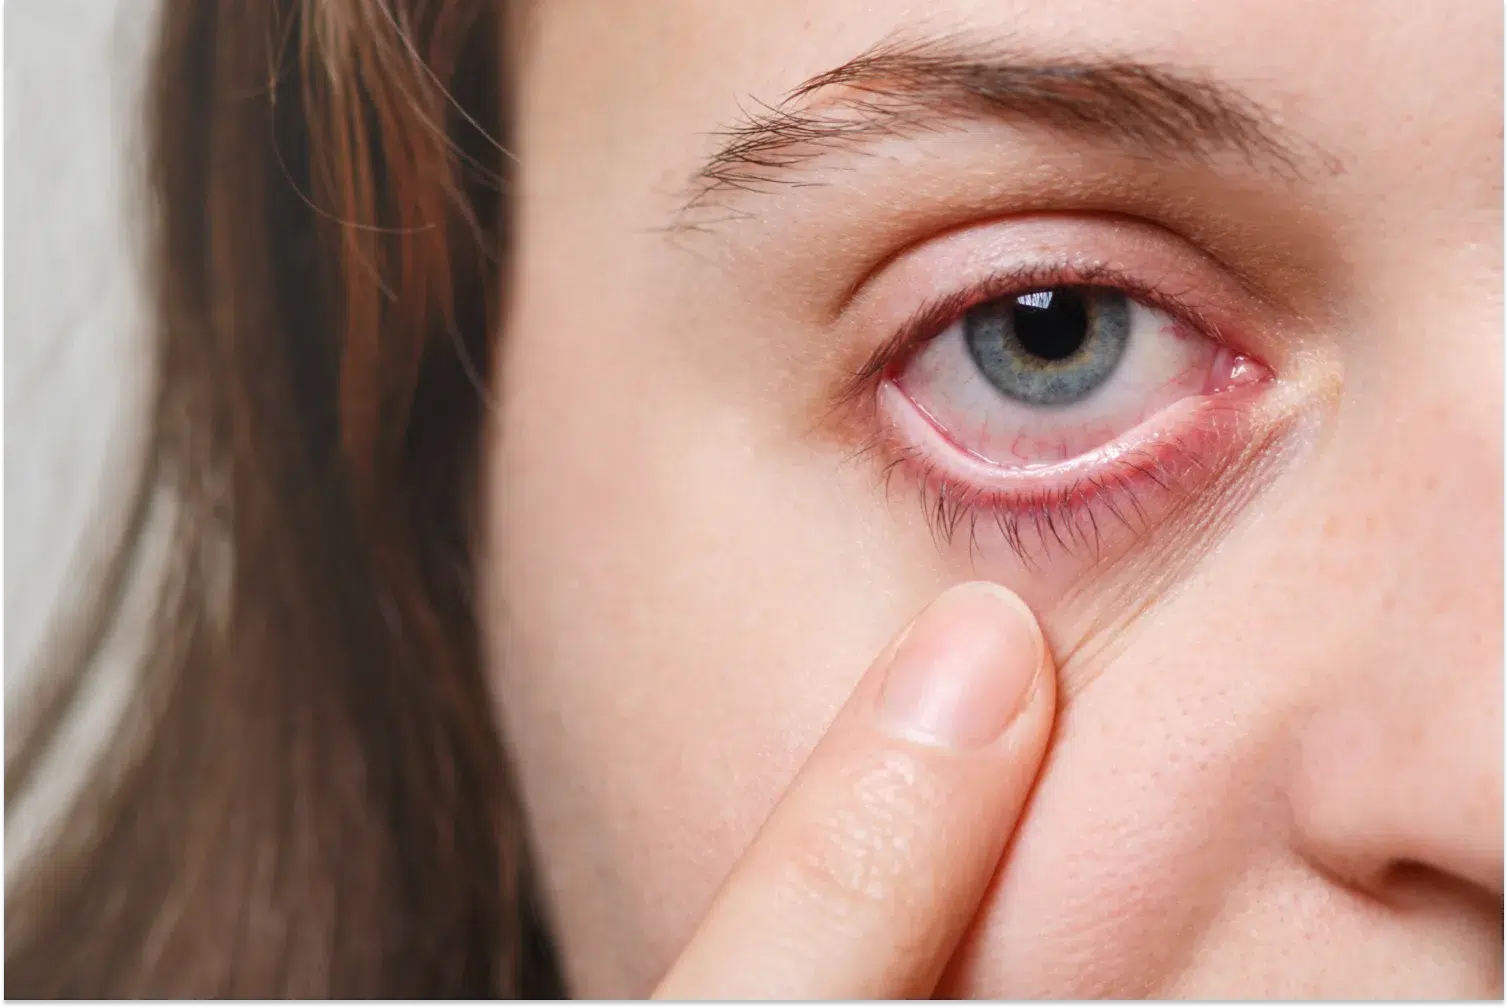 Does CBD Make Your Eyes Red?